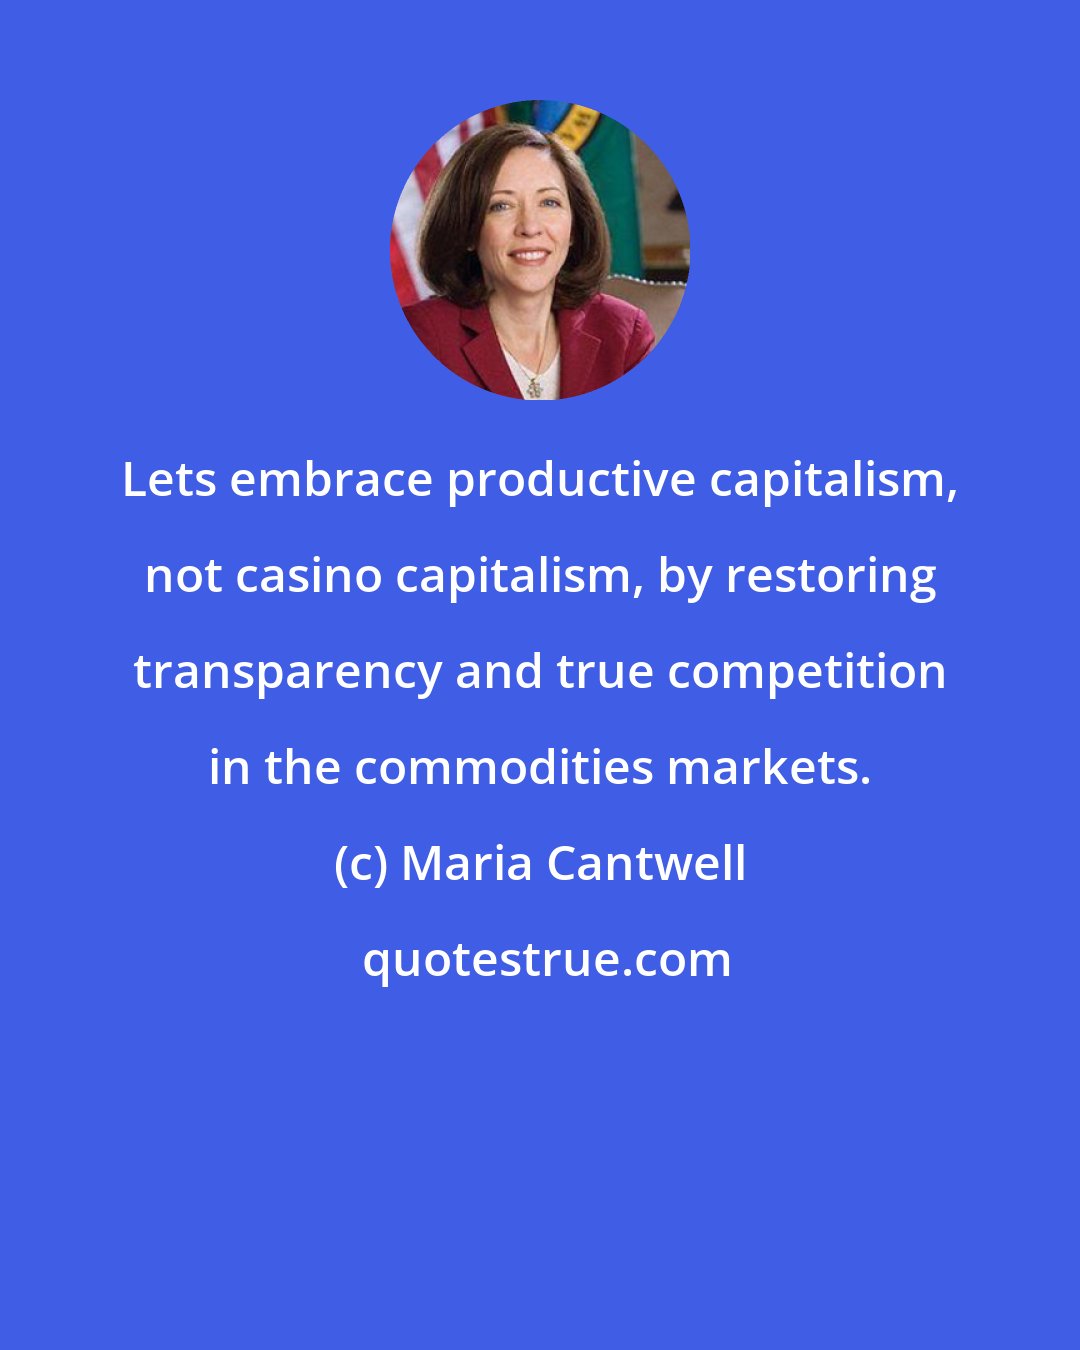 Maria Cantwell: Lets embrace productive capitalism, not casino capitalism, by restoring transparency and true competition in the commodities markets.